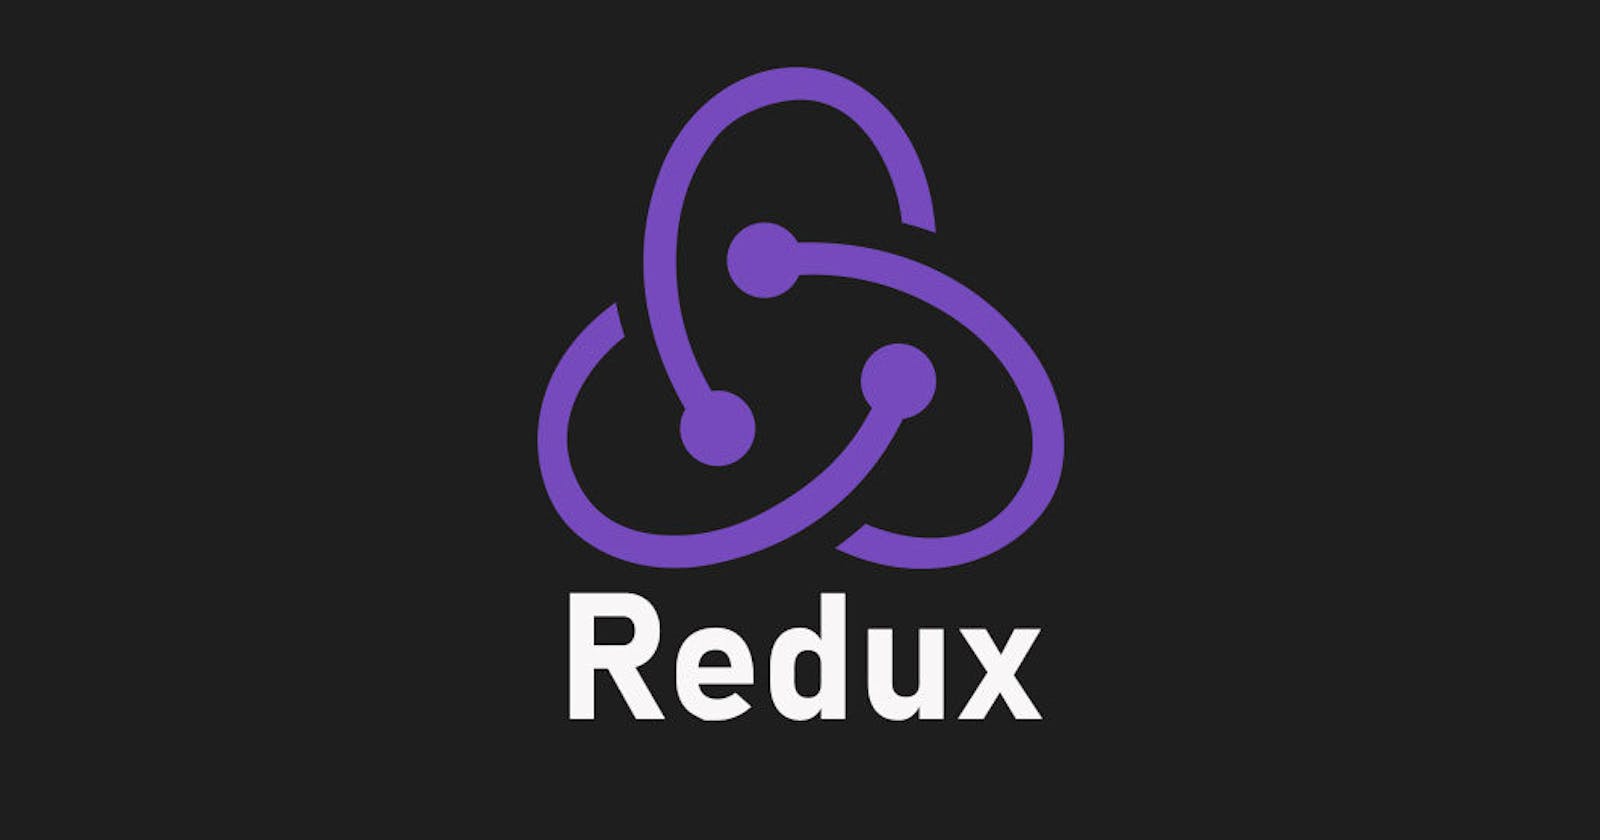 Get started with redux by creating a store and best practices!